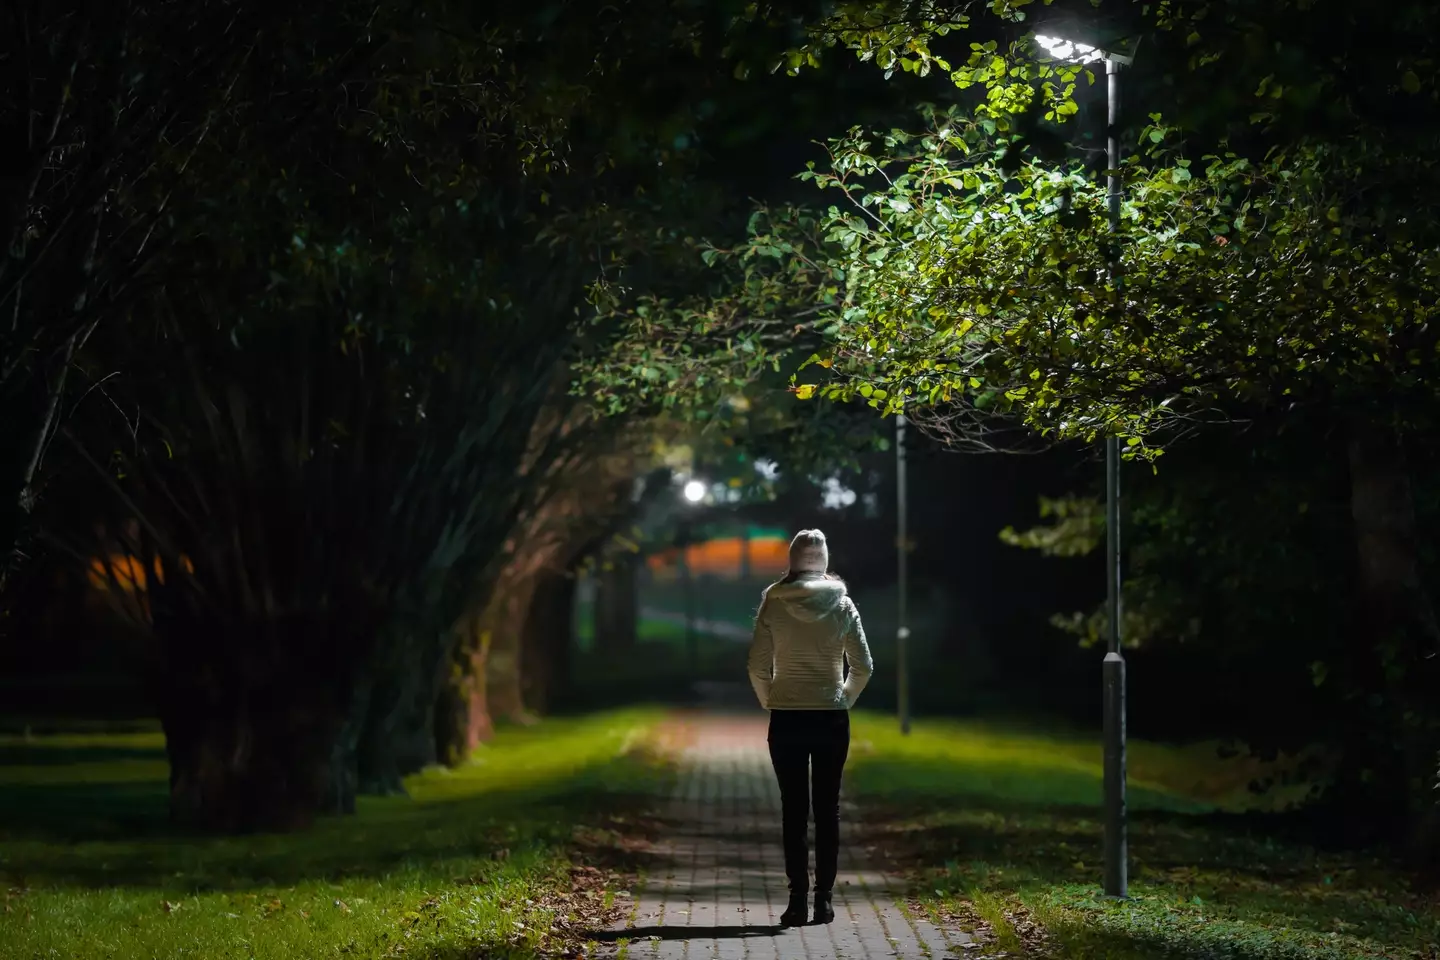 Nearly half of women said they felt unsafe walking home at night (